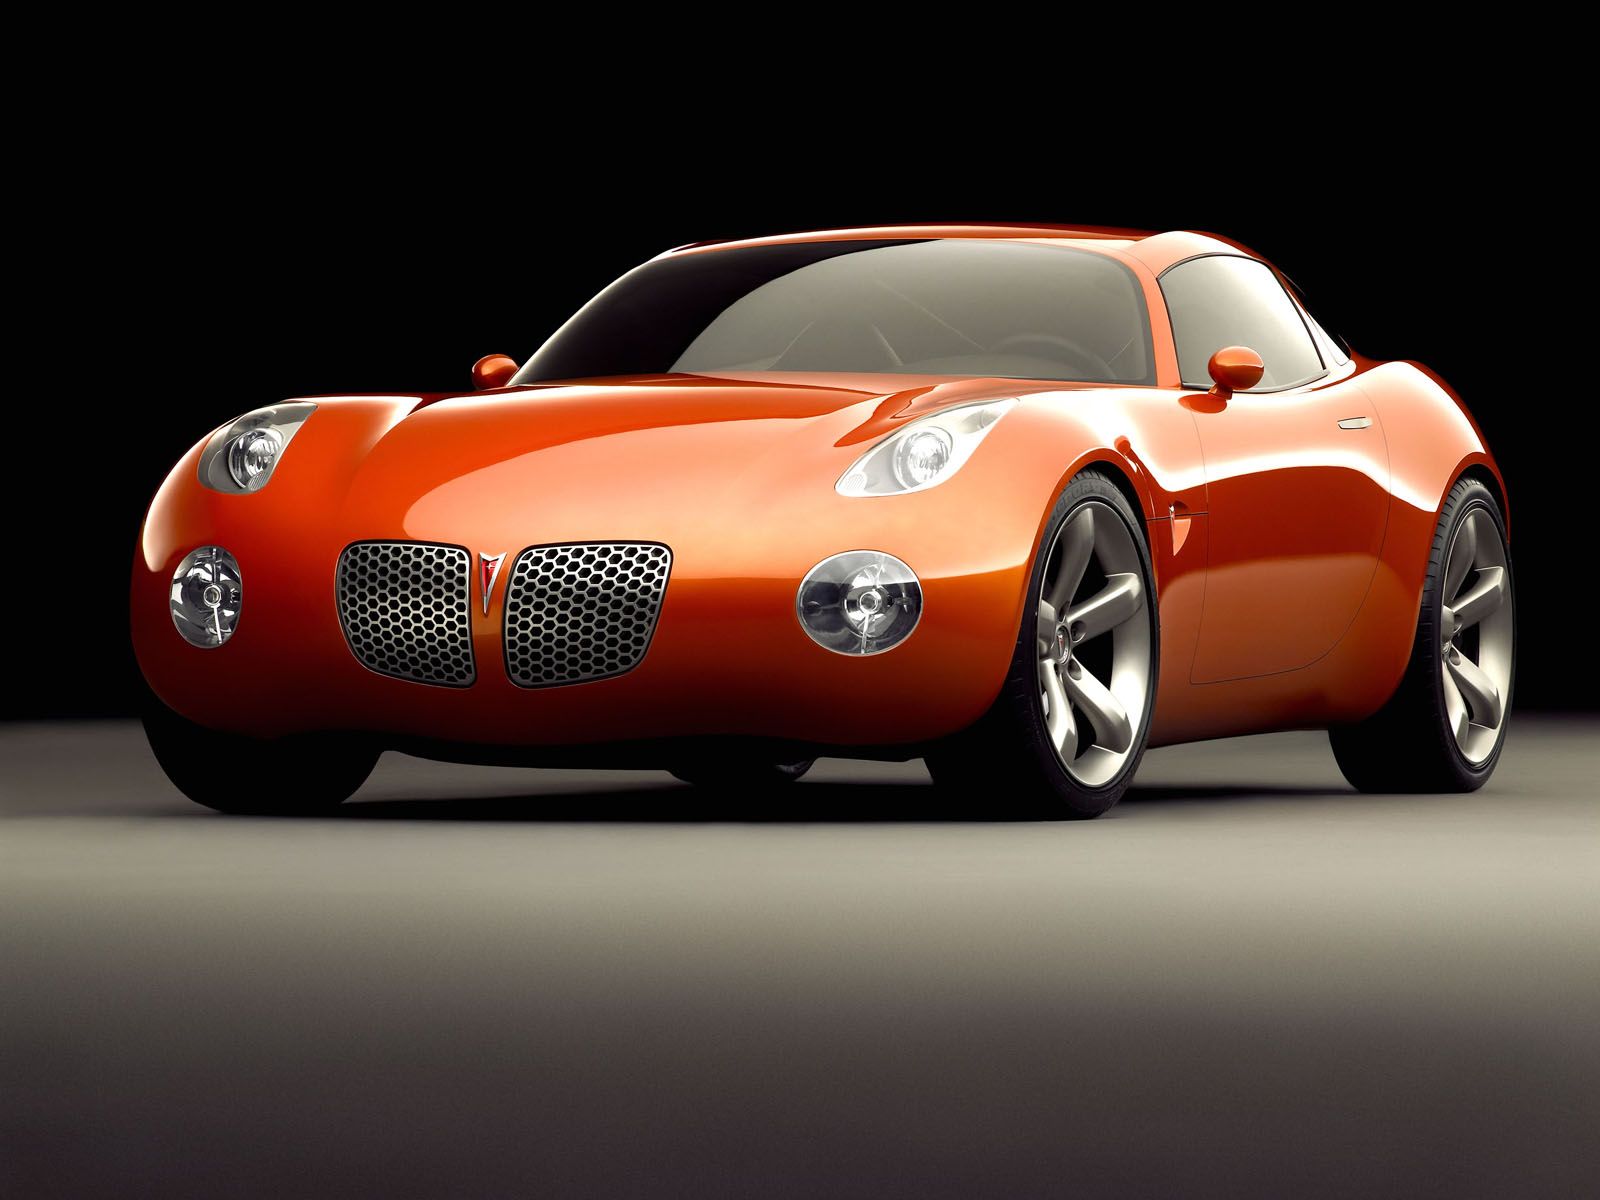 Download Pontiac Solstice photo #8552) You can use this pic as wallpaper (p...